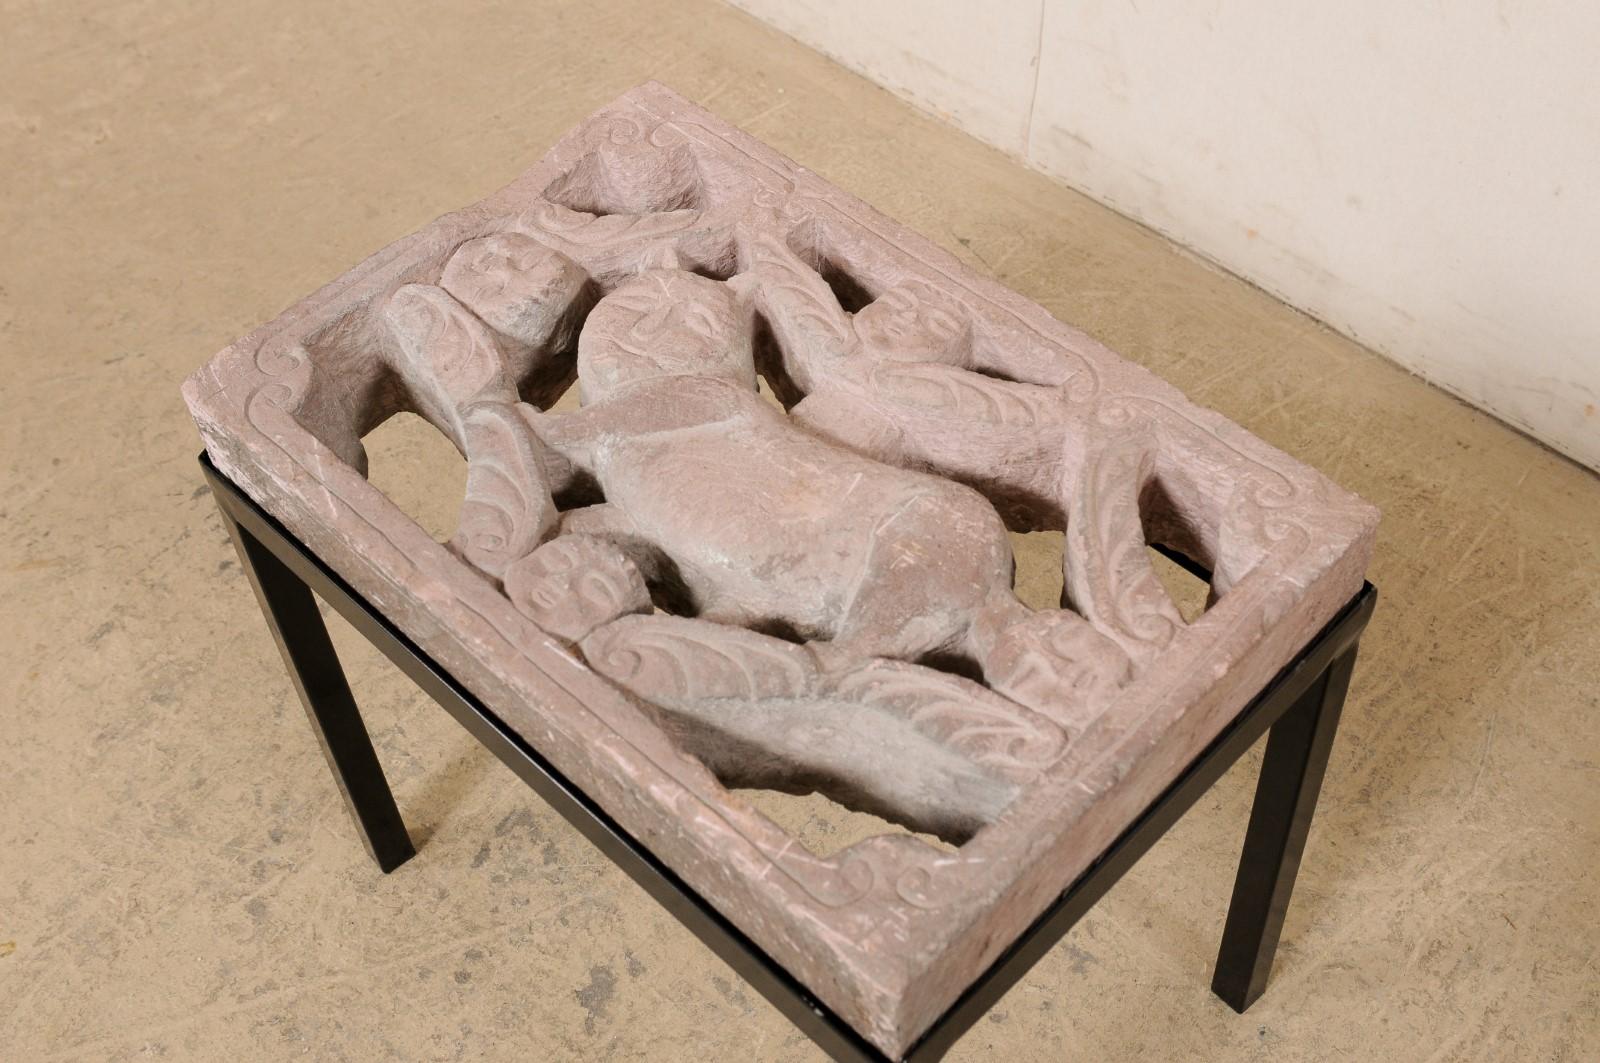 A unique side table, which has been custom fashioned with a Mexican carved-stone paver. This fun little accent table features a vintage carved-stone from Mexico, whose pierced carvings showcase a chubby cat (or gato) at center with winged cherubs at